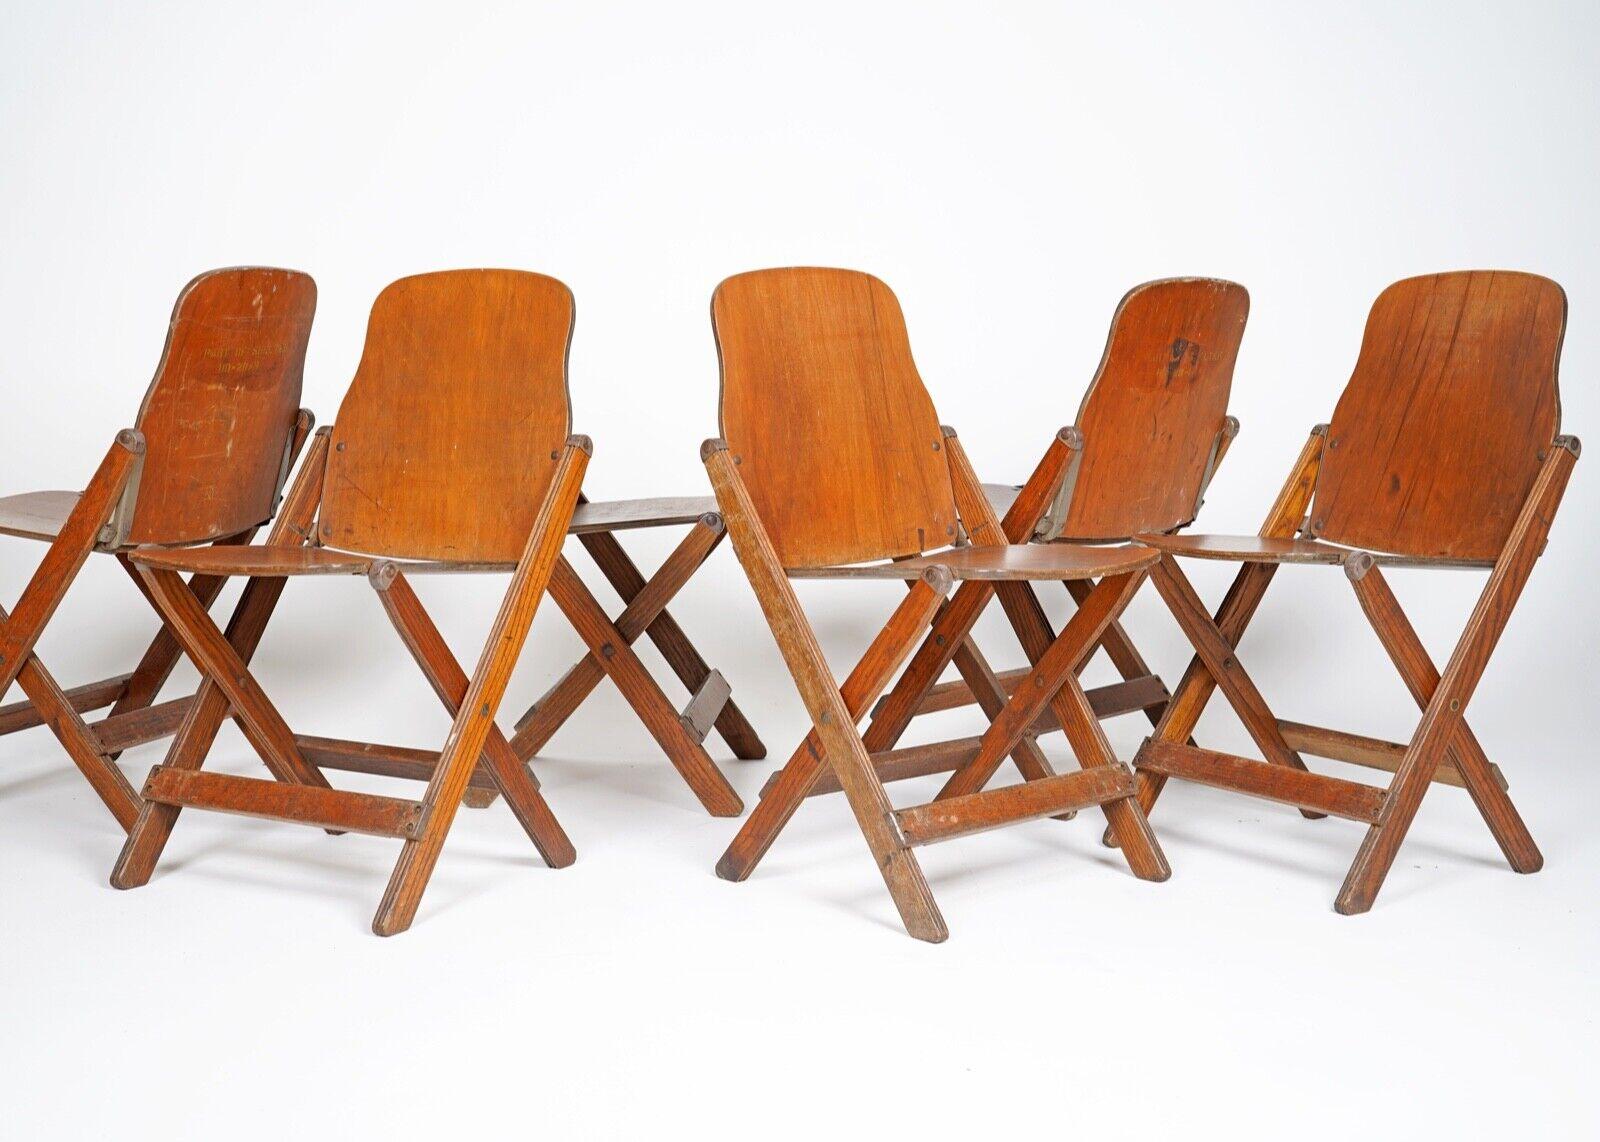 Set of 6 folding chairs made by American Seating Company, Grand Rapids Michigan.
Fantastic utilitarian chairs that cleverly fold down so you can store them tidily away.
Being made for the American army they are very well made sturdy chairs 
All